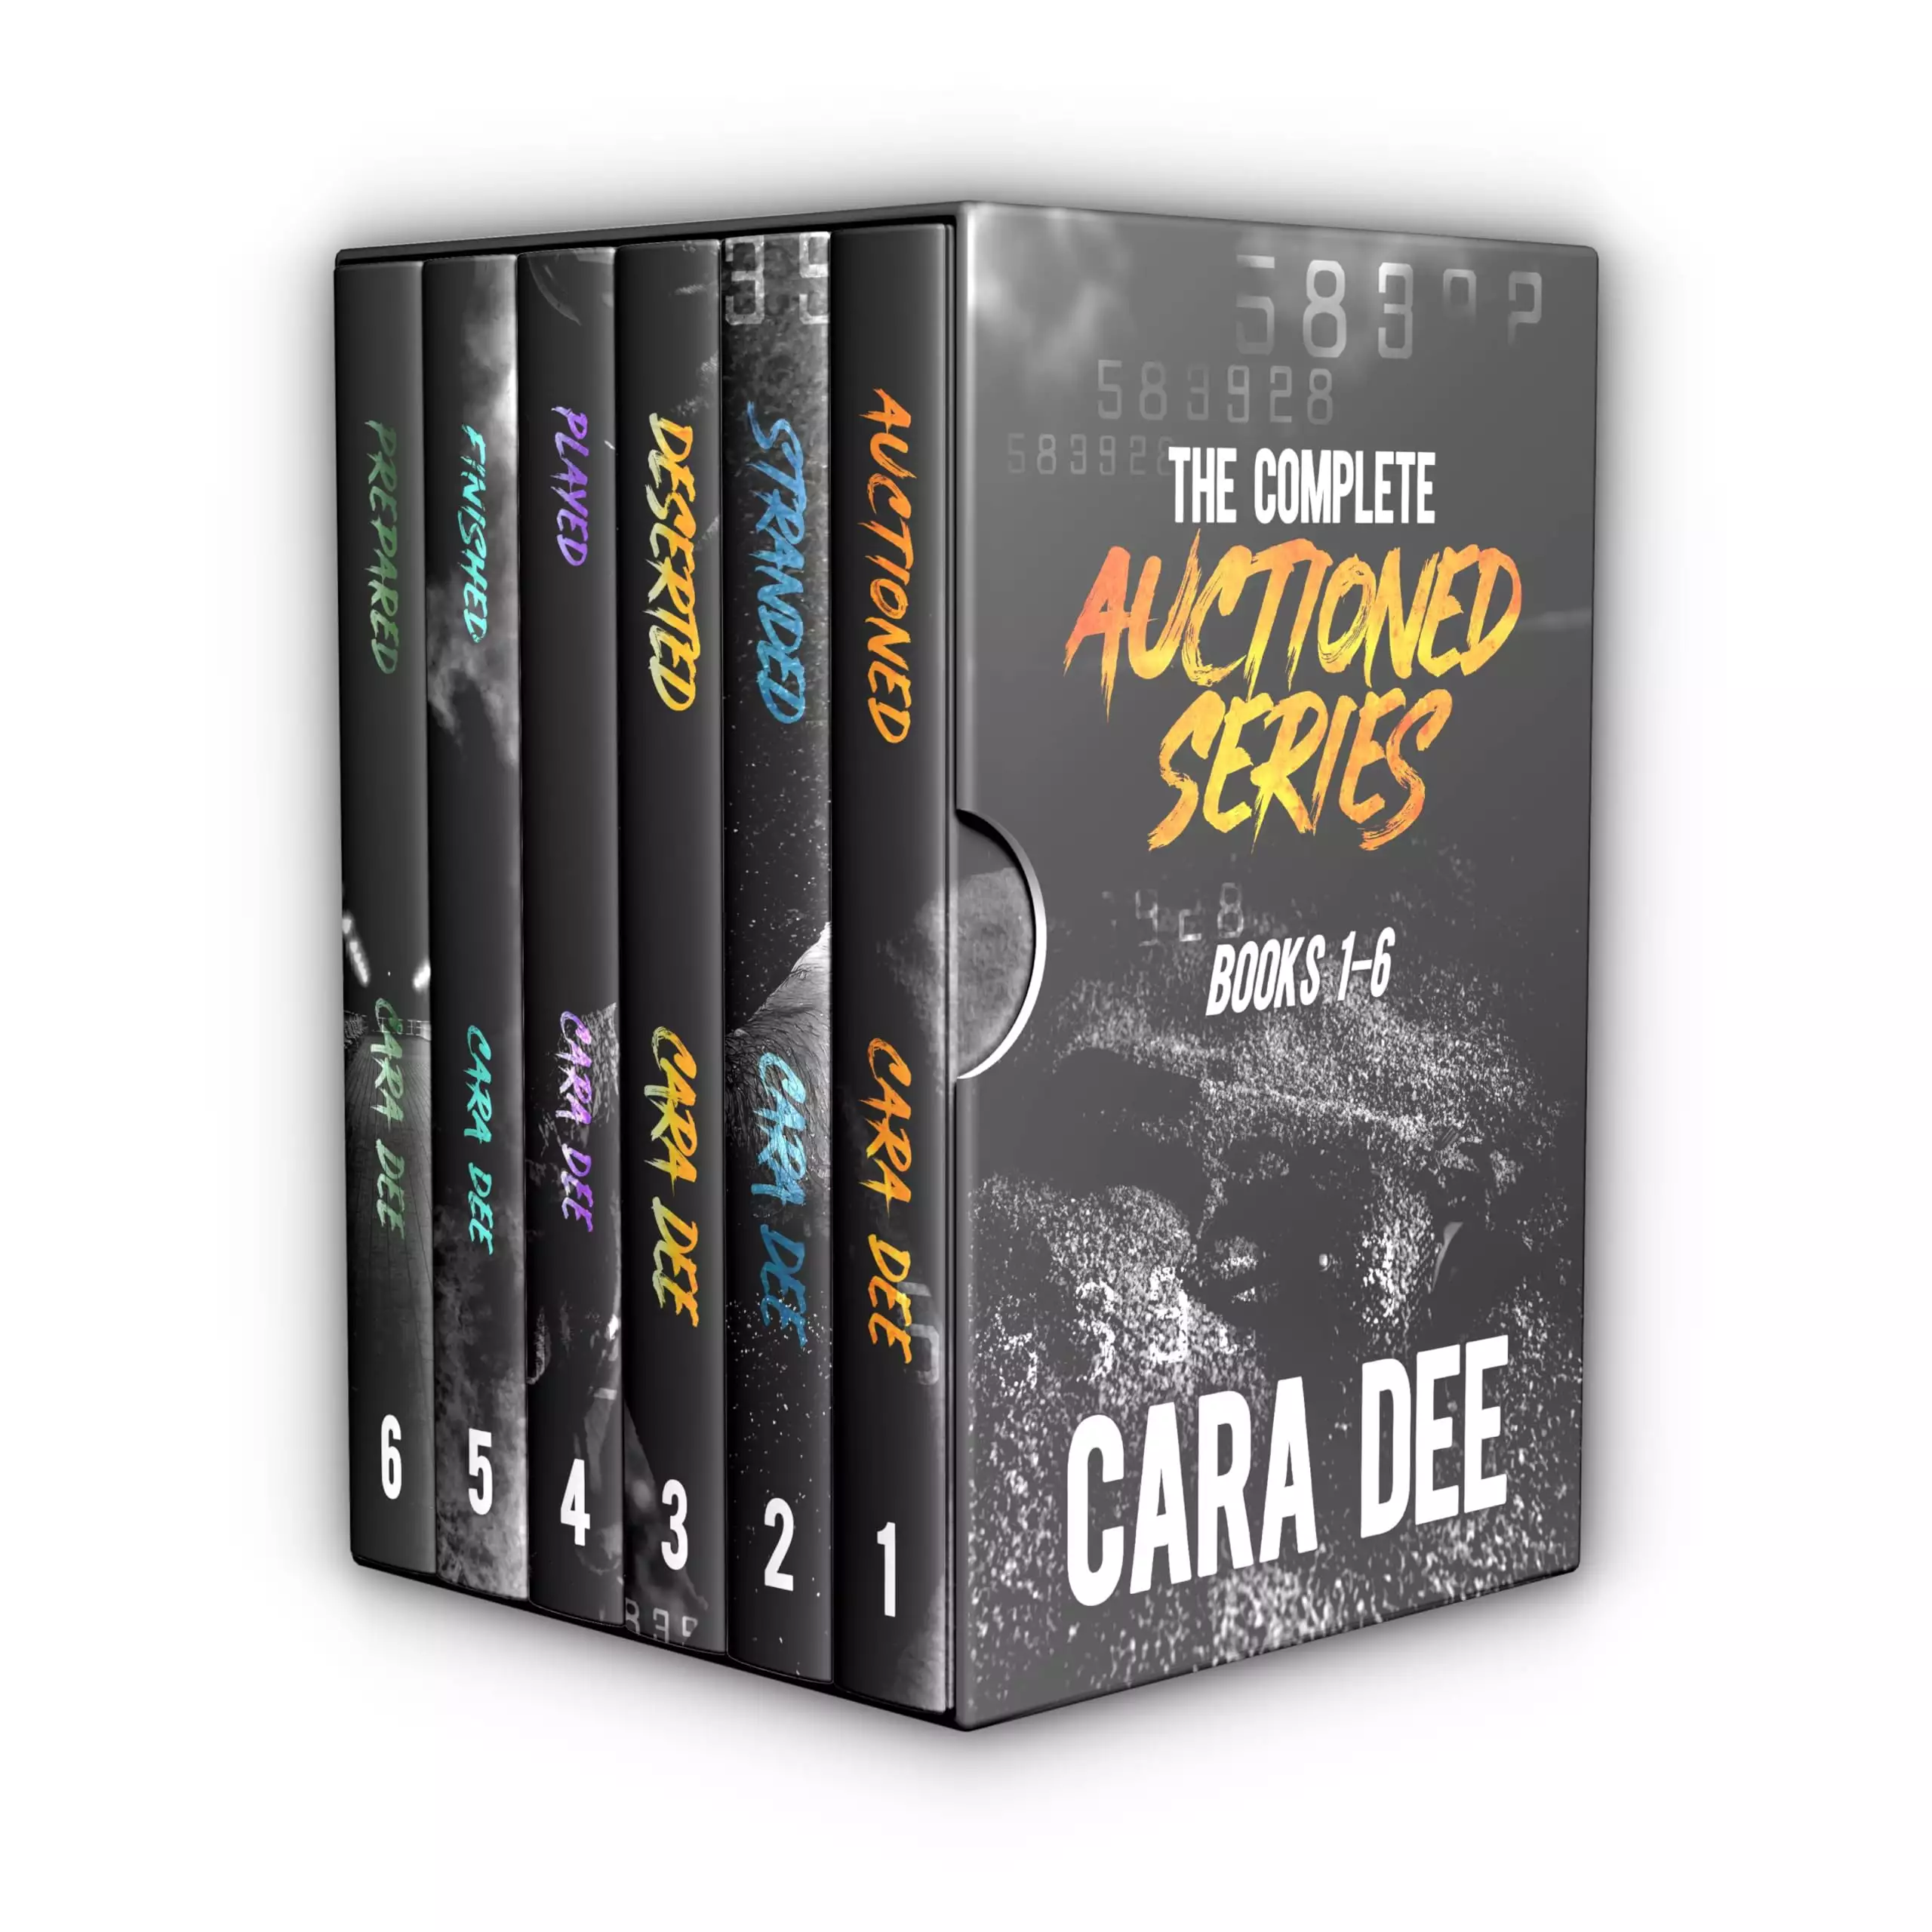 The Complete Auctioned Series: Books 1-6